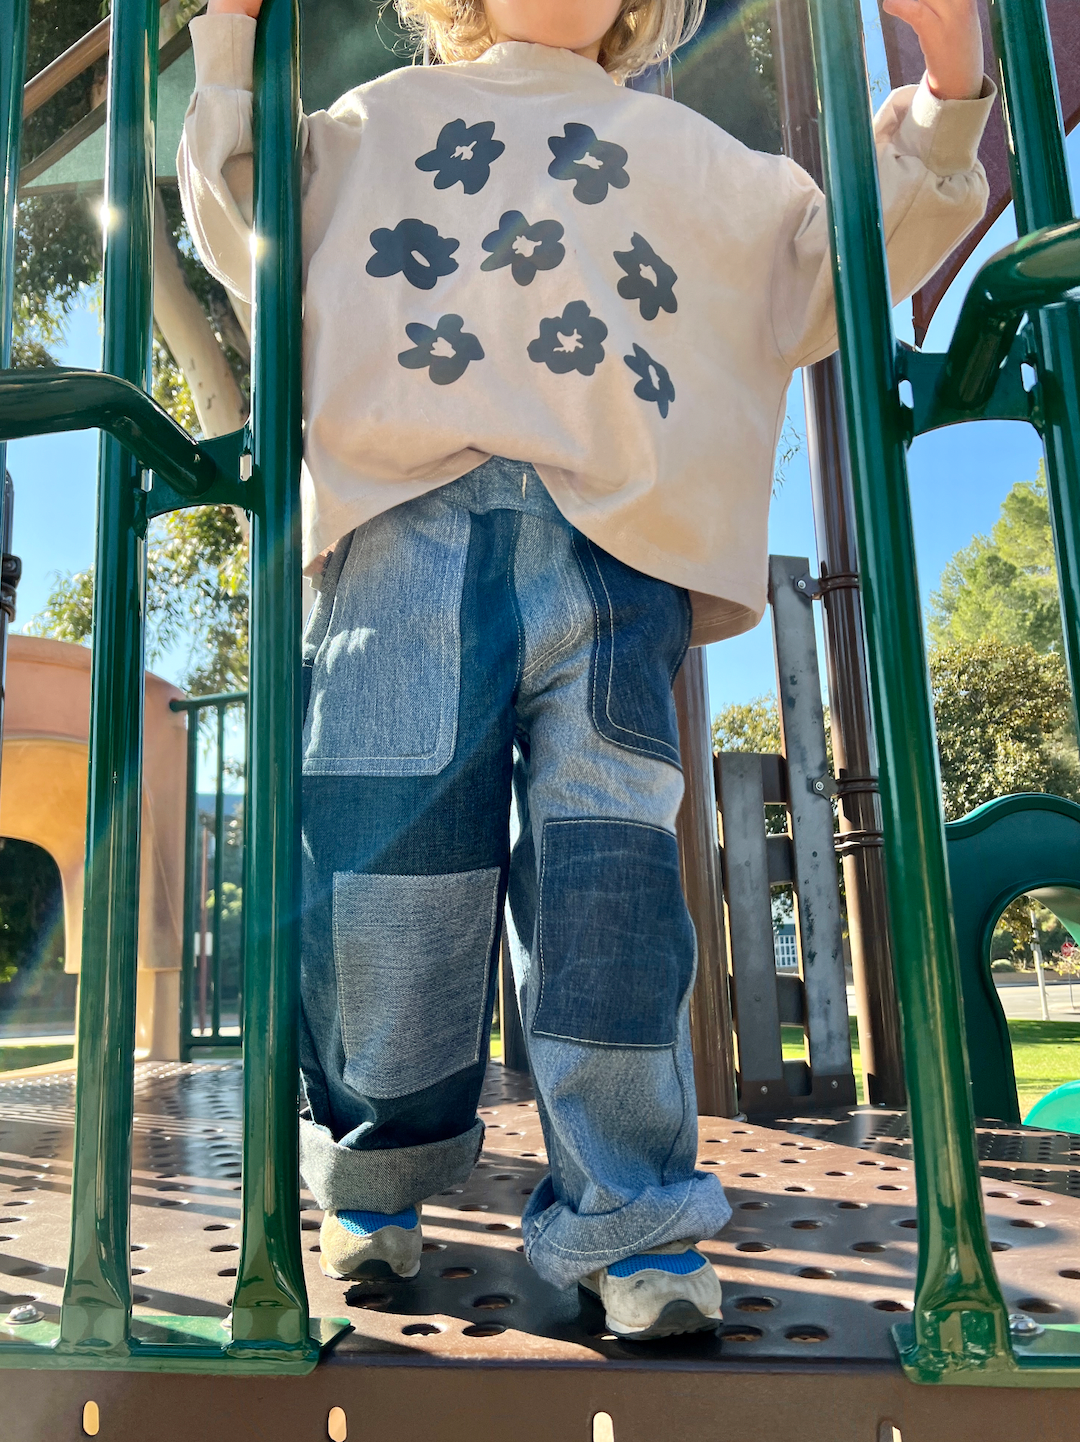 A child on a jungle gym wearing a kids' tee shirt in soft gray with dark gray flowers, over two-tone denim pants